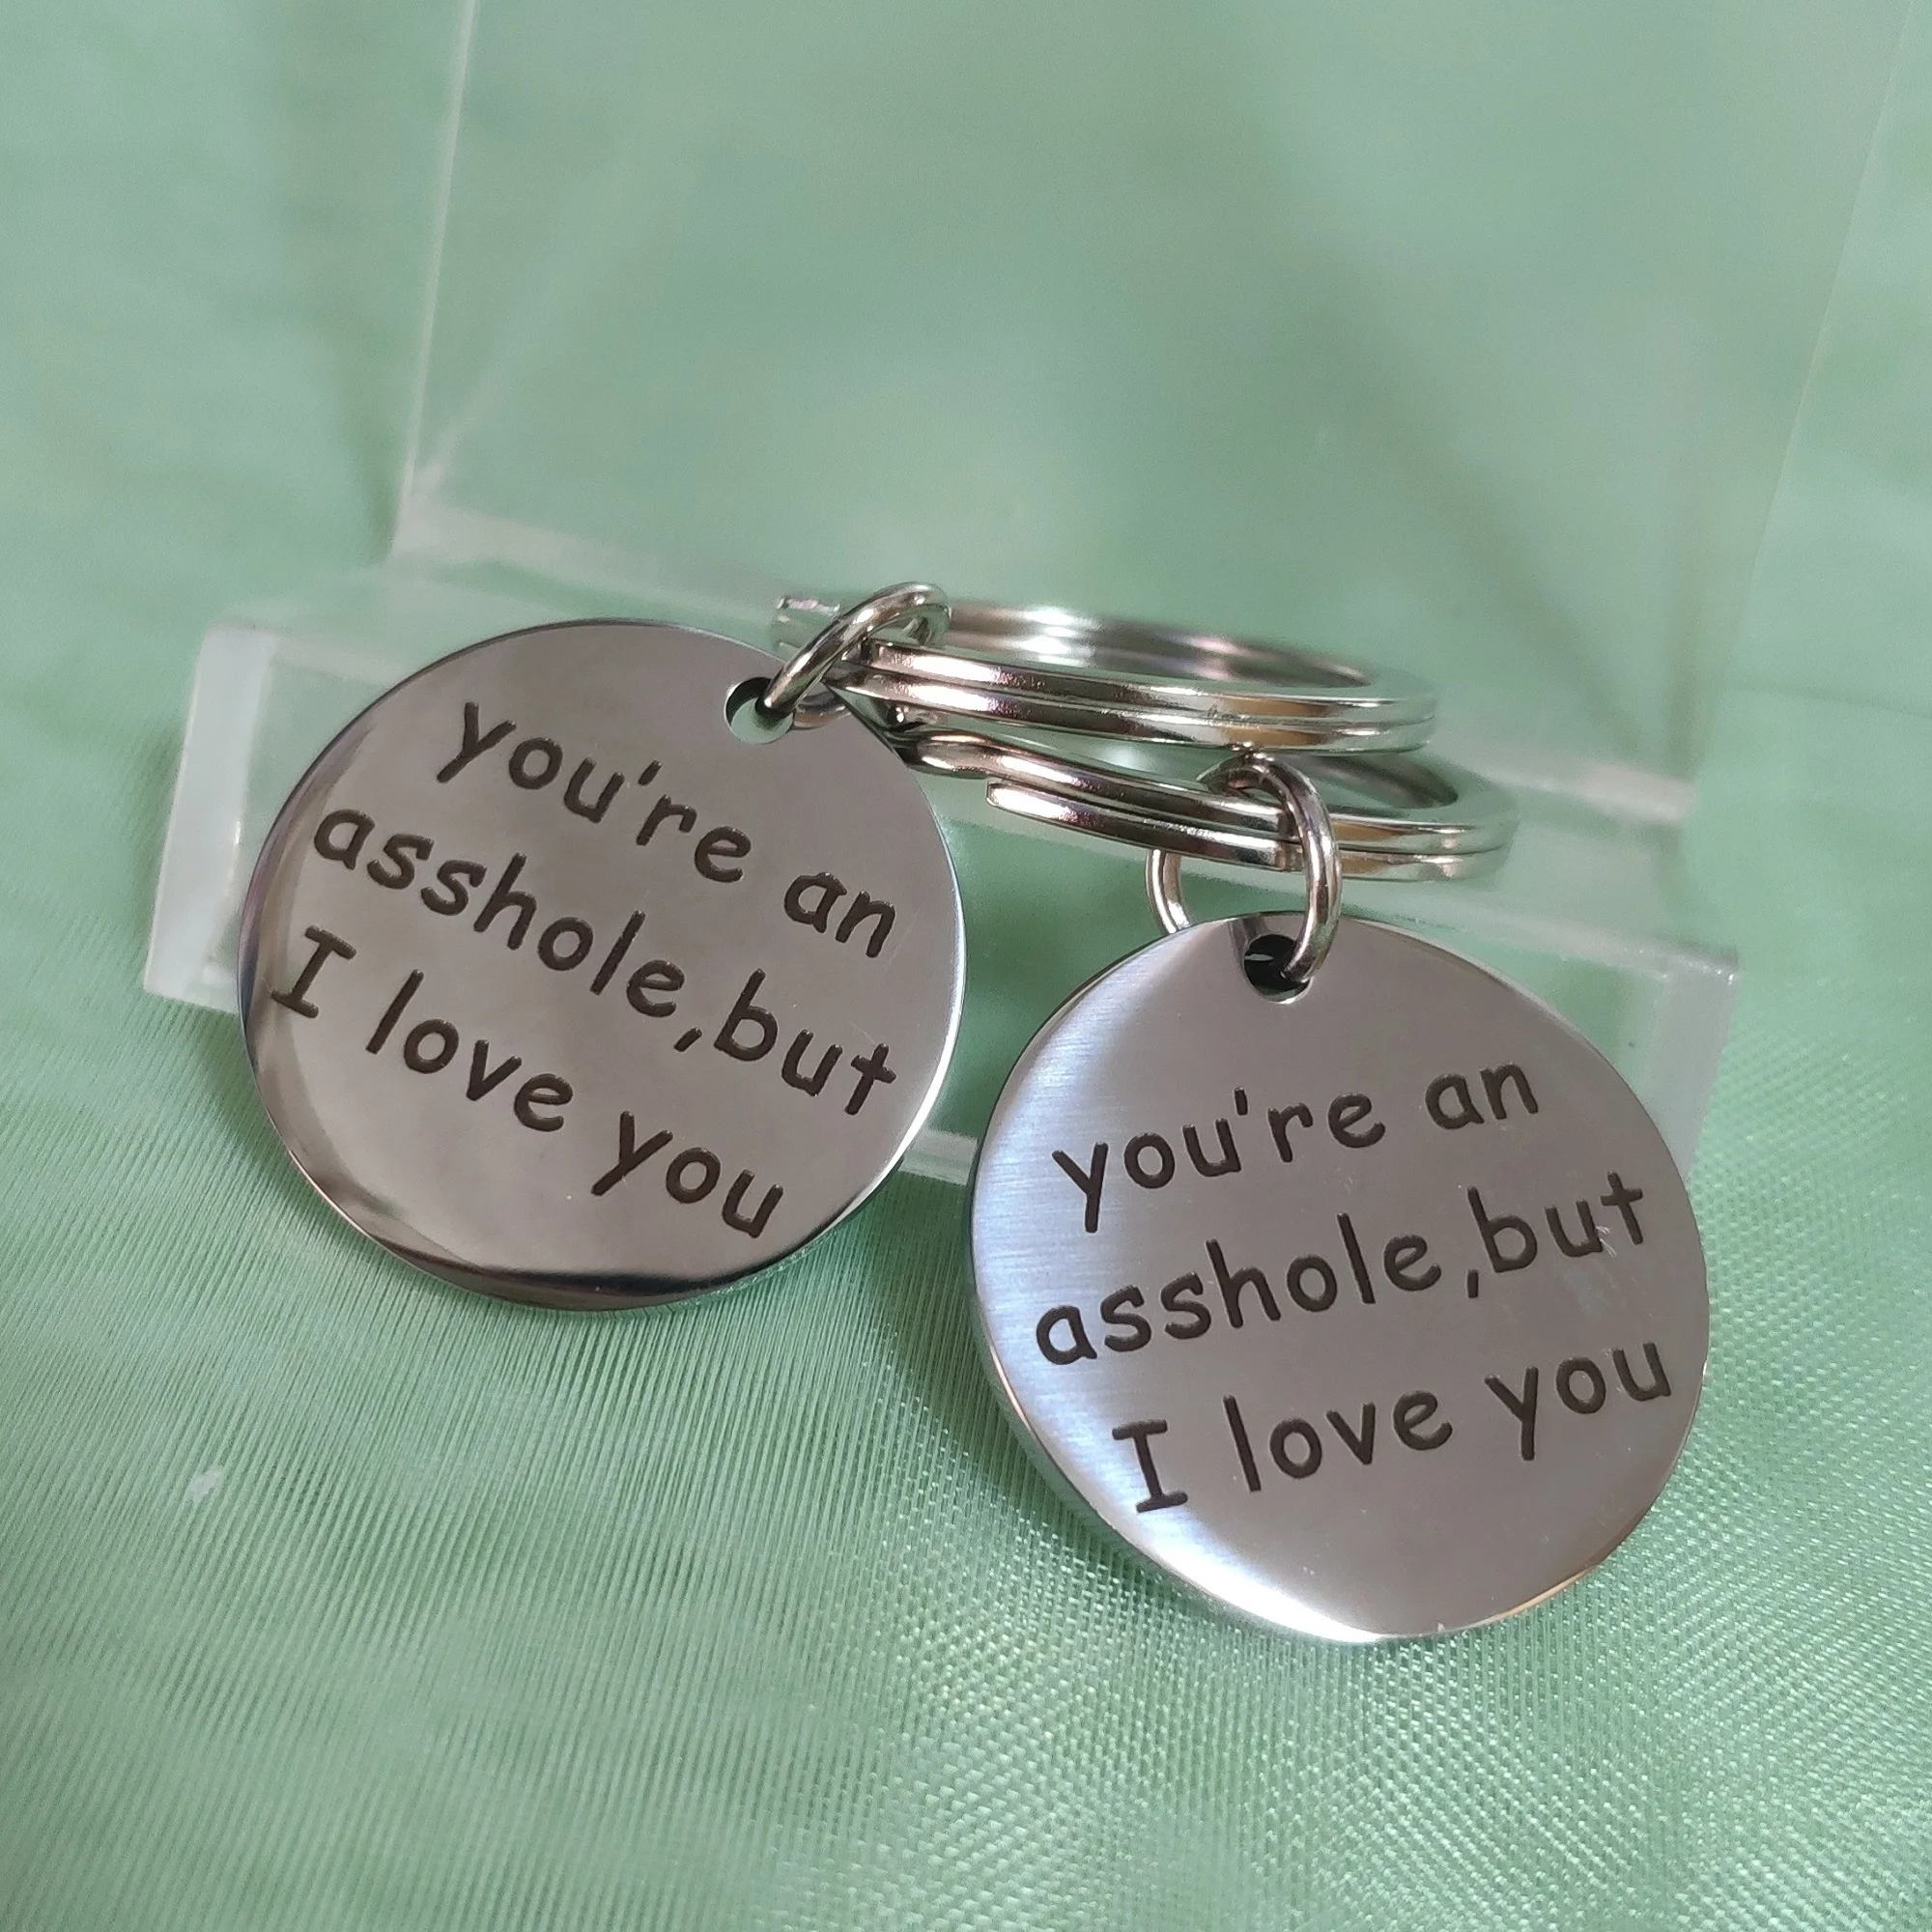 

You're My an Keychain for Car Keys Funny Phrases Couple Gift Stainless Steel Mirror Boyfriend Girlfriend Ornaments Keyring